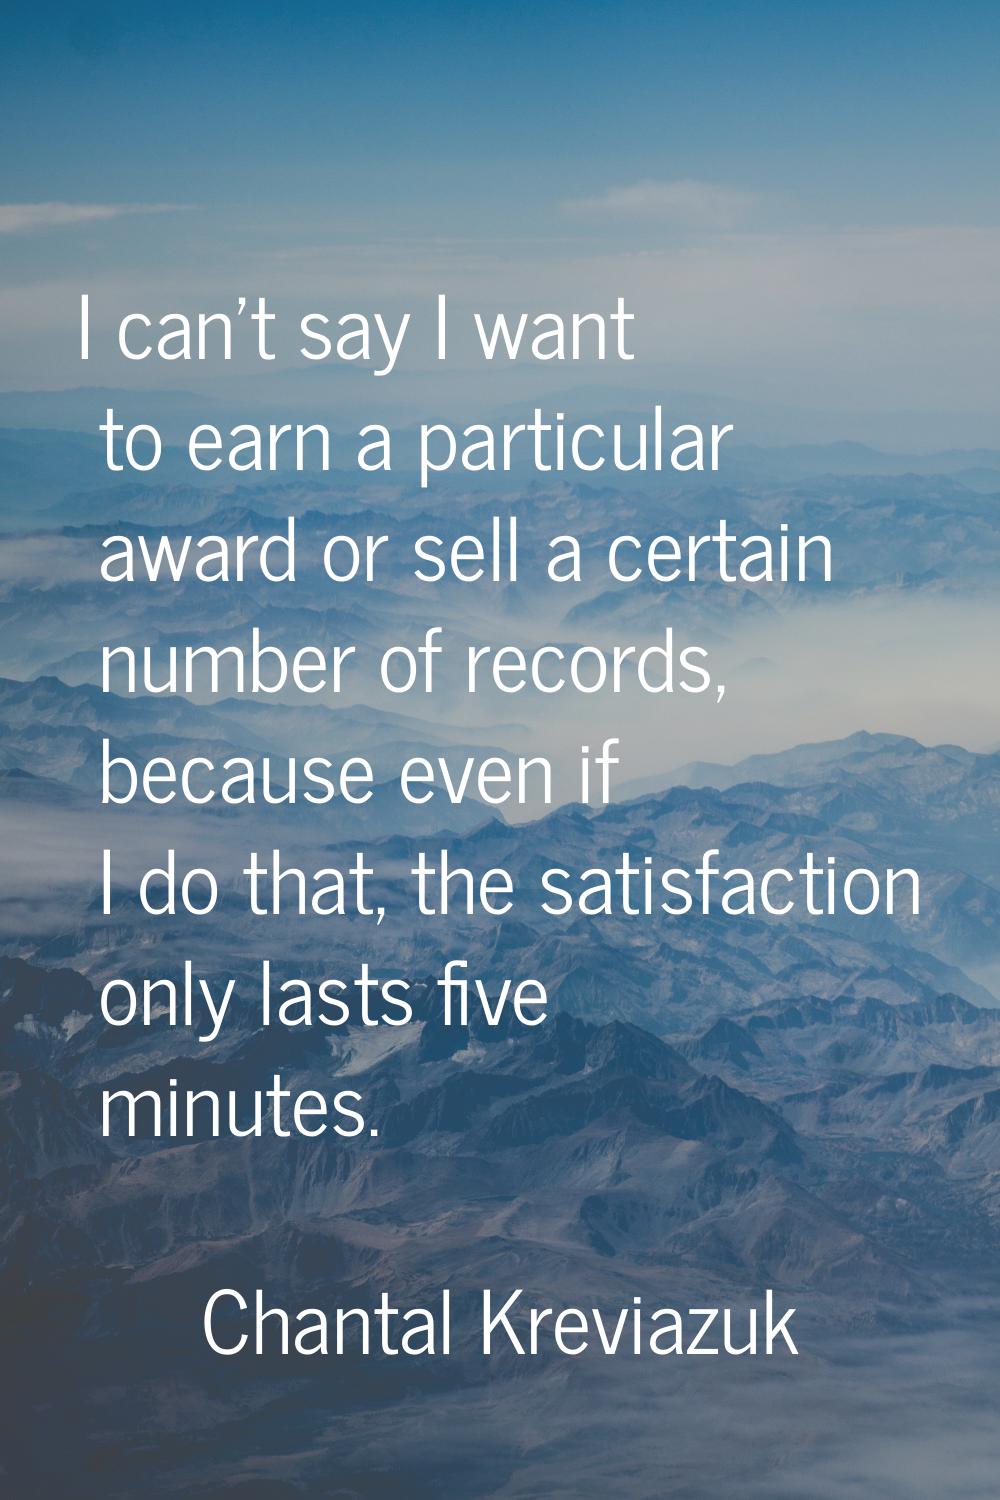 I can't say I want to earn a particular award or sell a certain number of records, because even if 